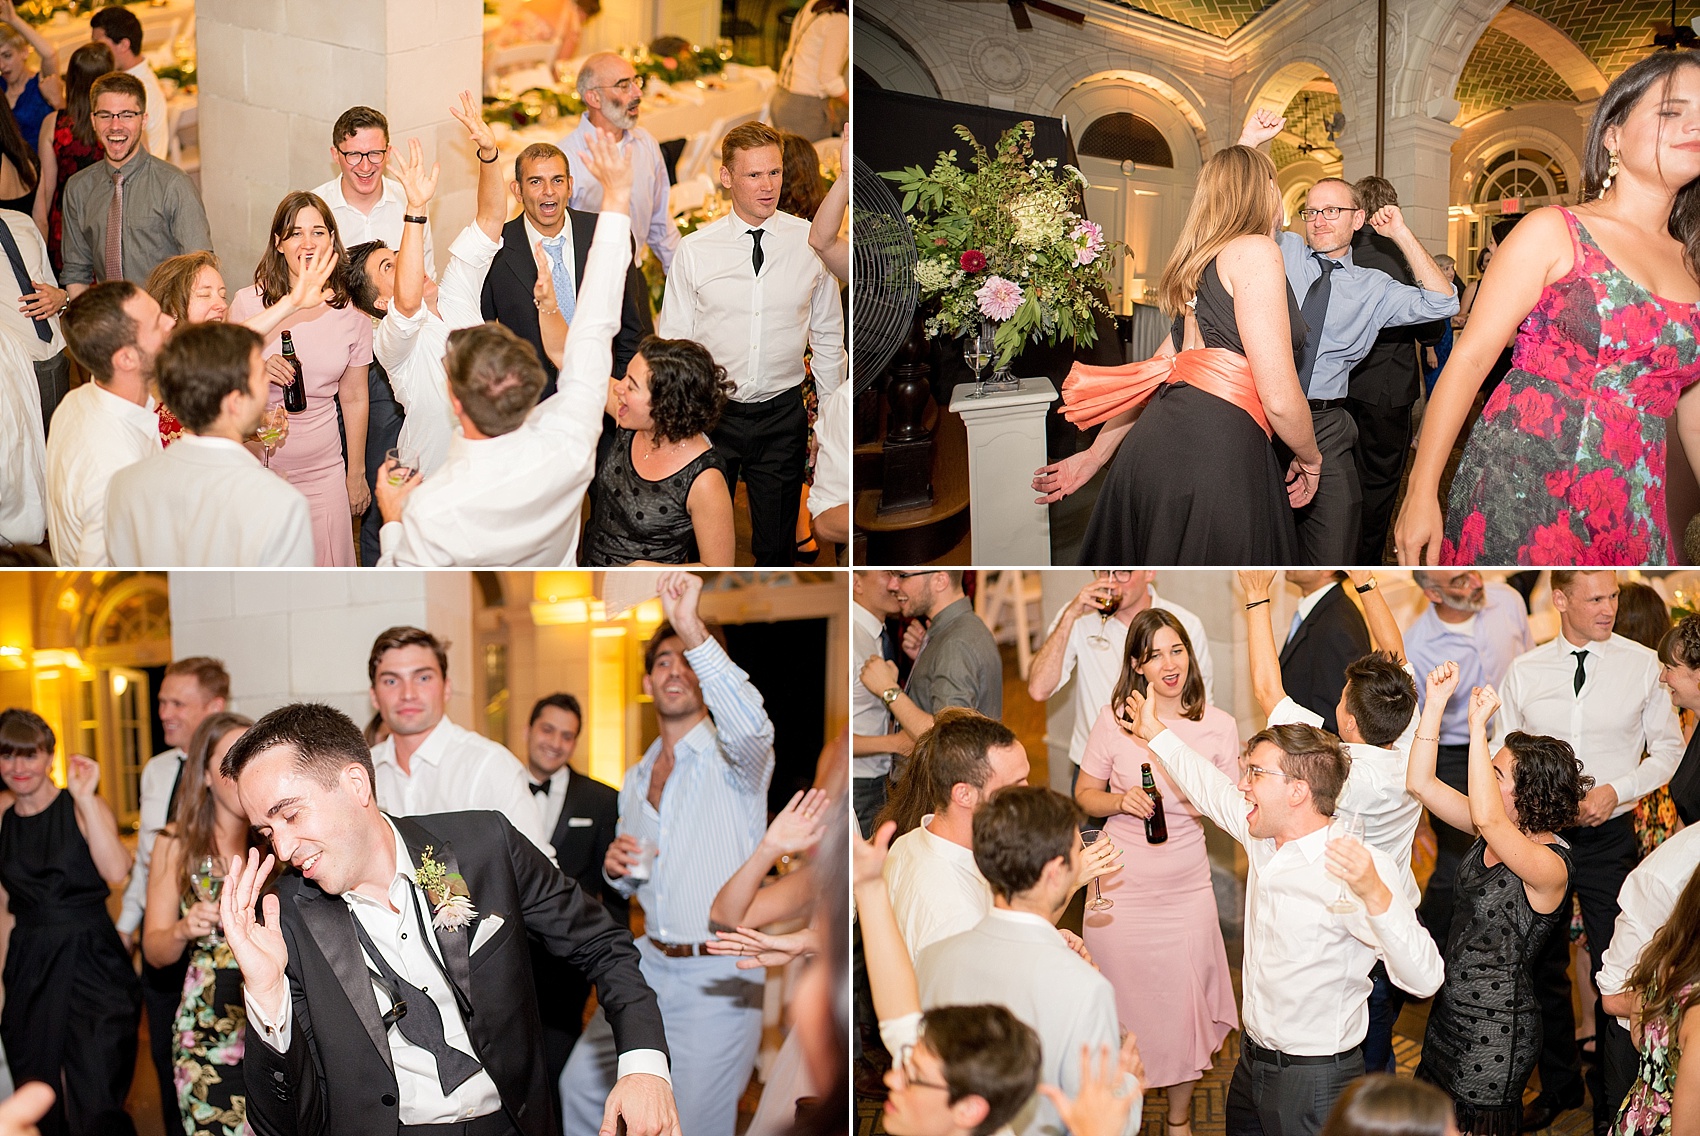 Mikkel Paige Photography photos of a wedding at Brooklyn's Prospect Park Boathouse in NYC.